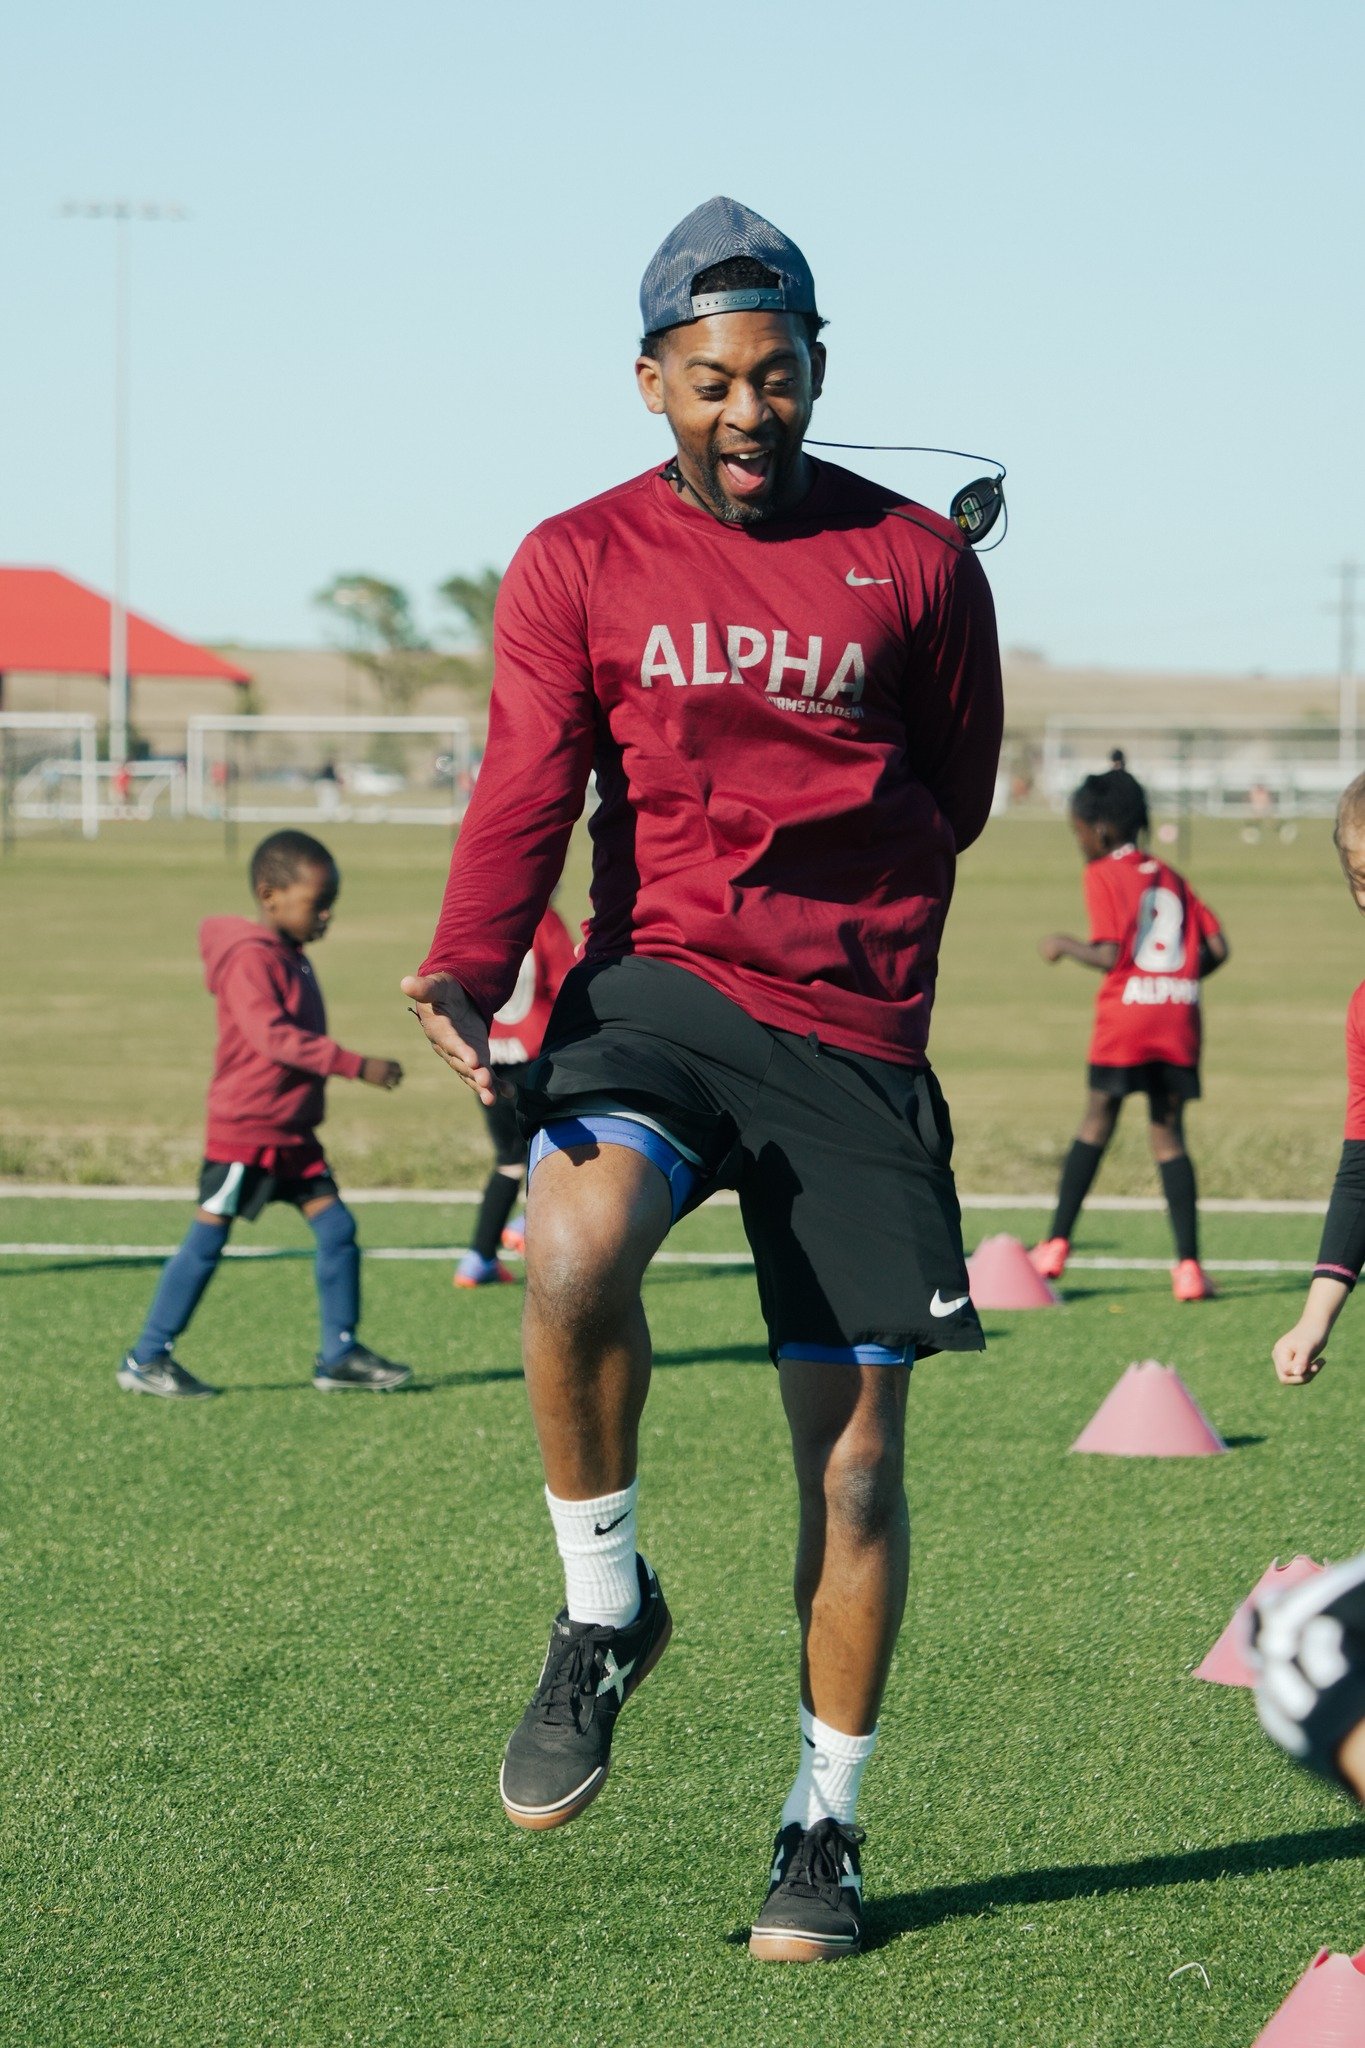 Coach Courtney's energy is unmatched! 😂😁 #AlphaForms #NikeSoccer #SoccerSkills #SoccerTraining #SoccerCoach